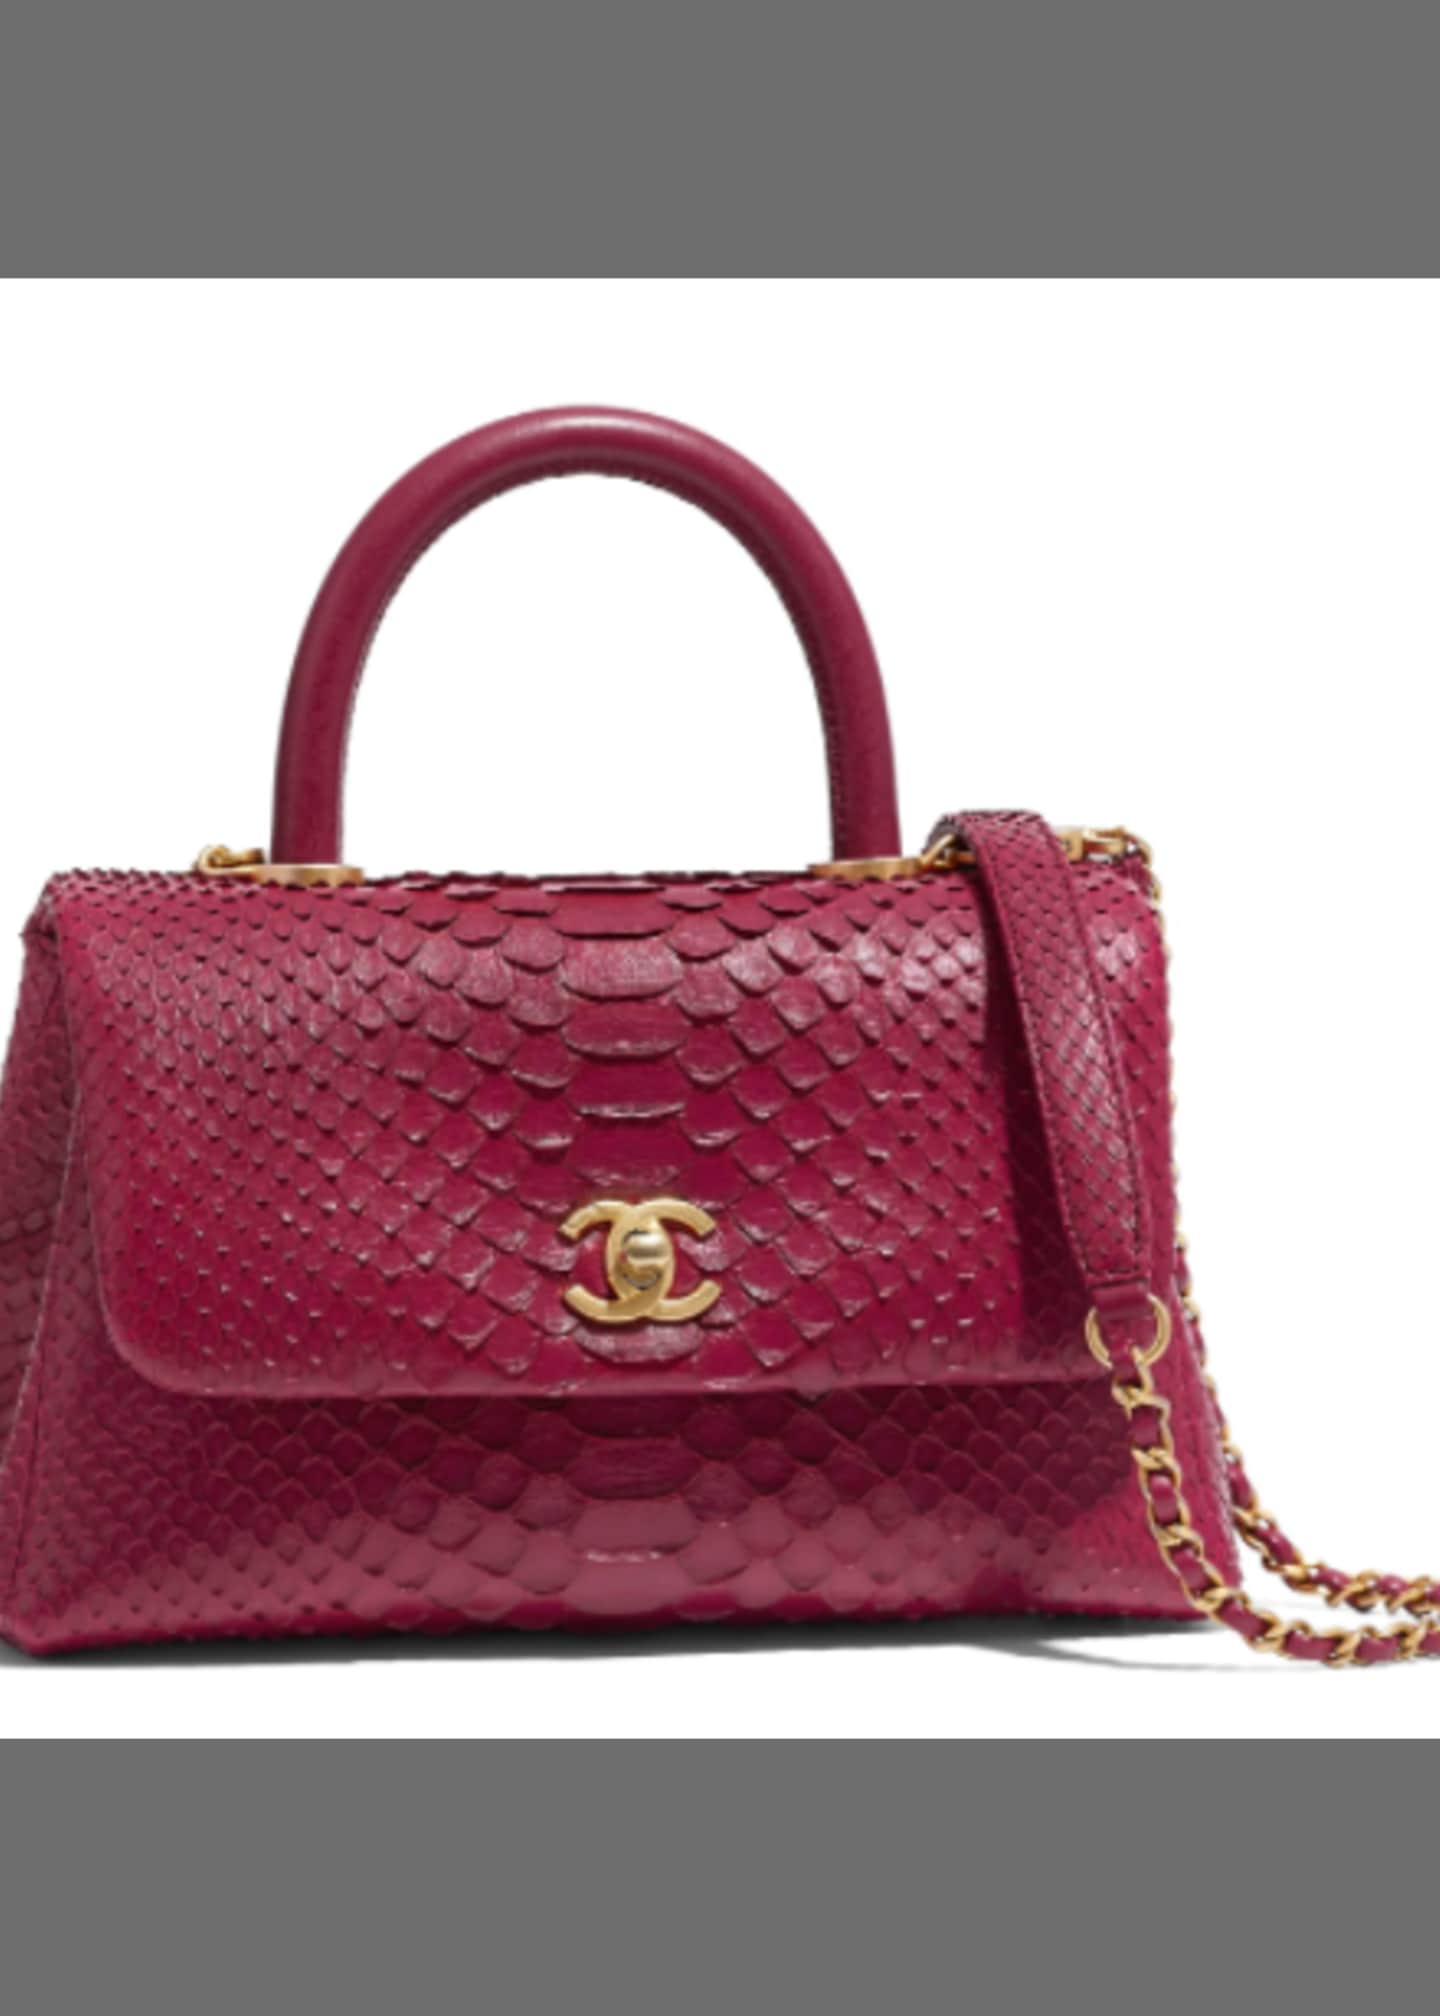 CHANEL SMALL FLAP BAG WITH TOP HANDLE - Bergdorf Goodman